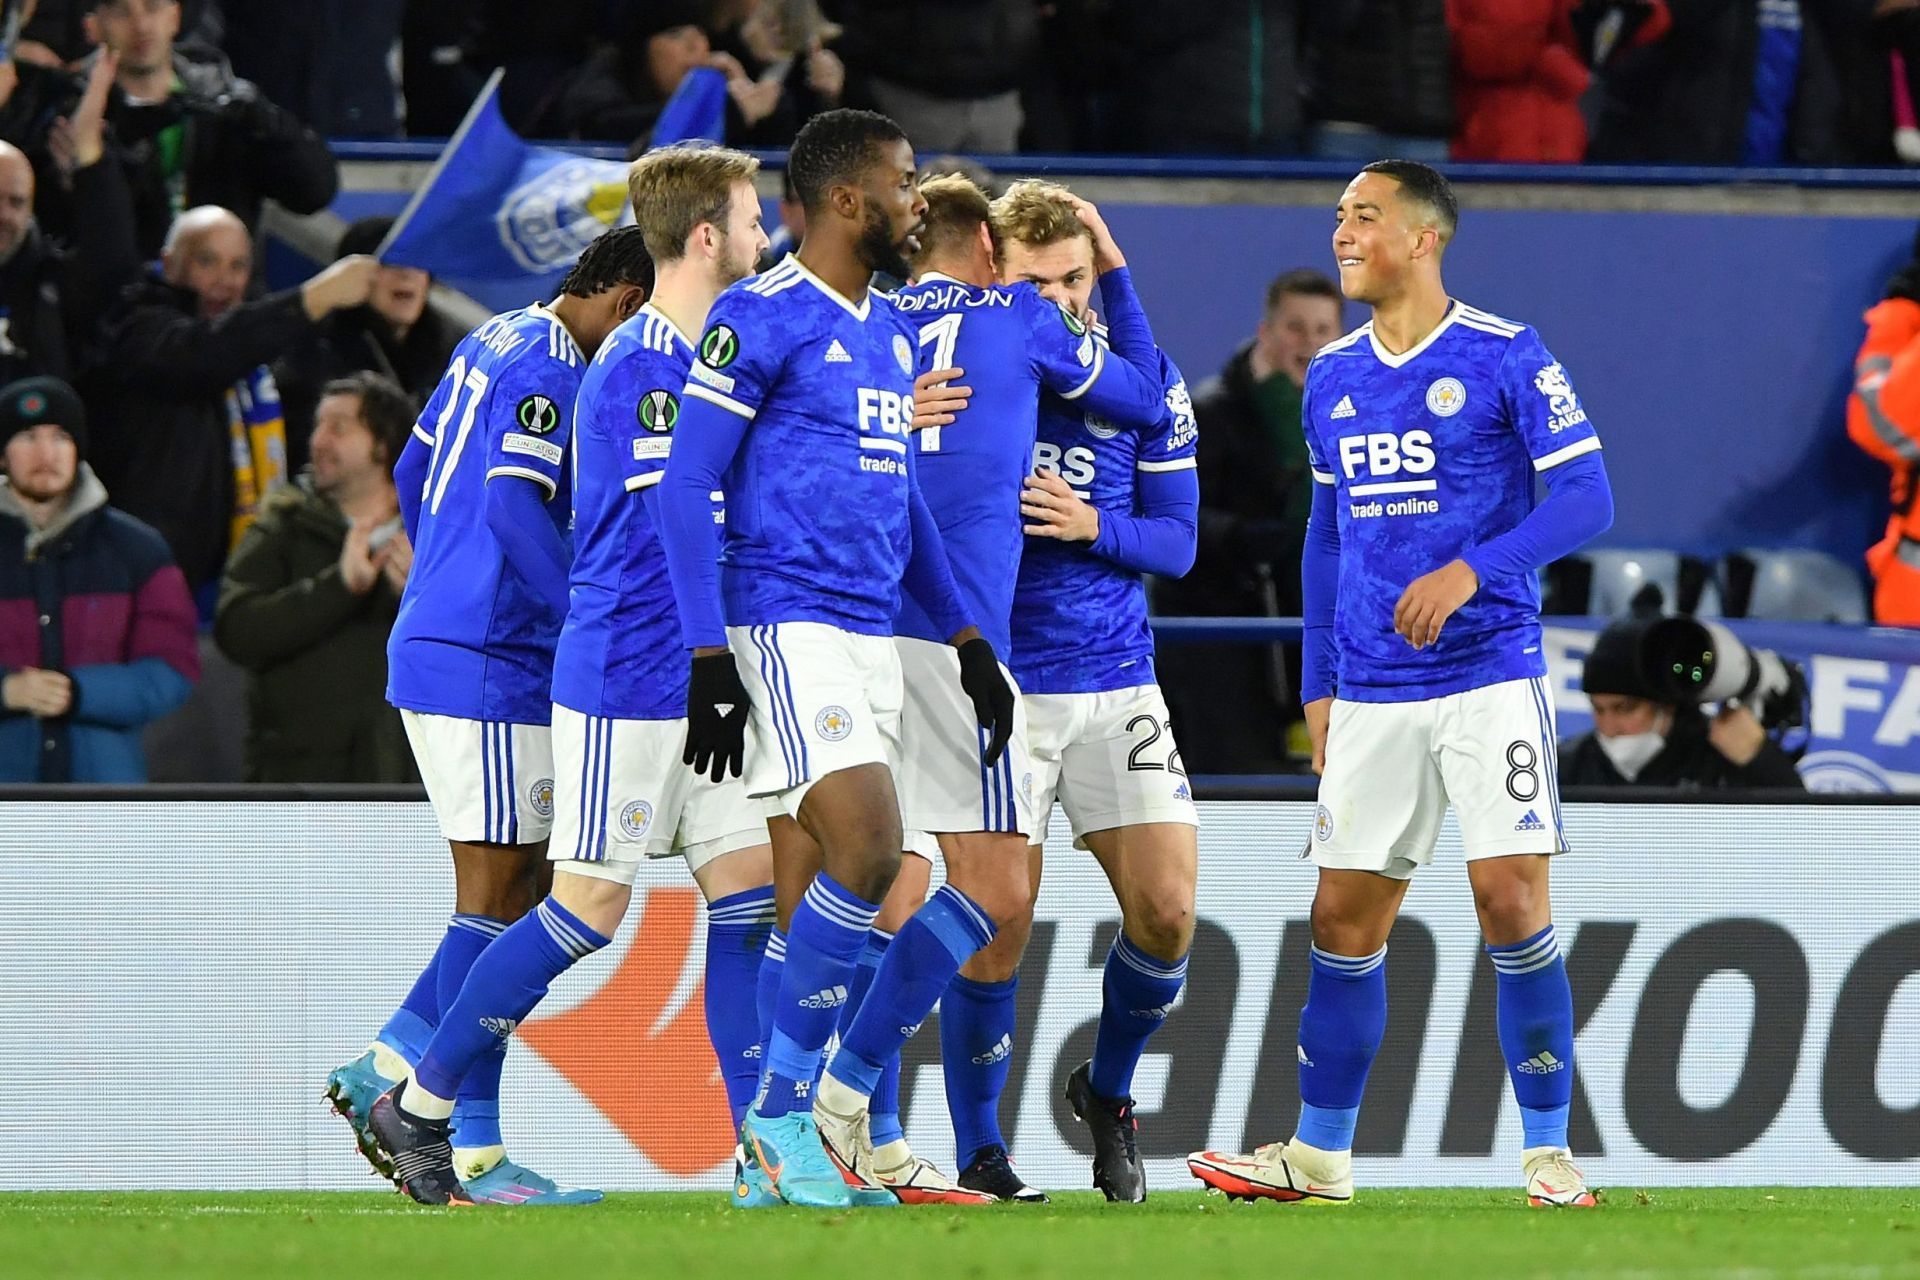 Leicester City ended their five-game unbeaten run with a 4-1 thrashing of Randers.